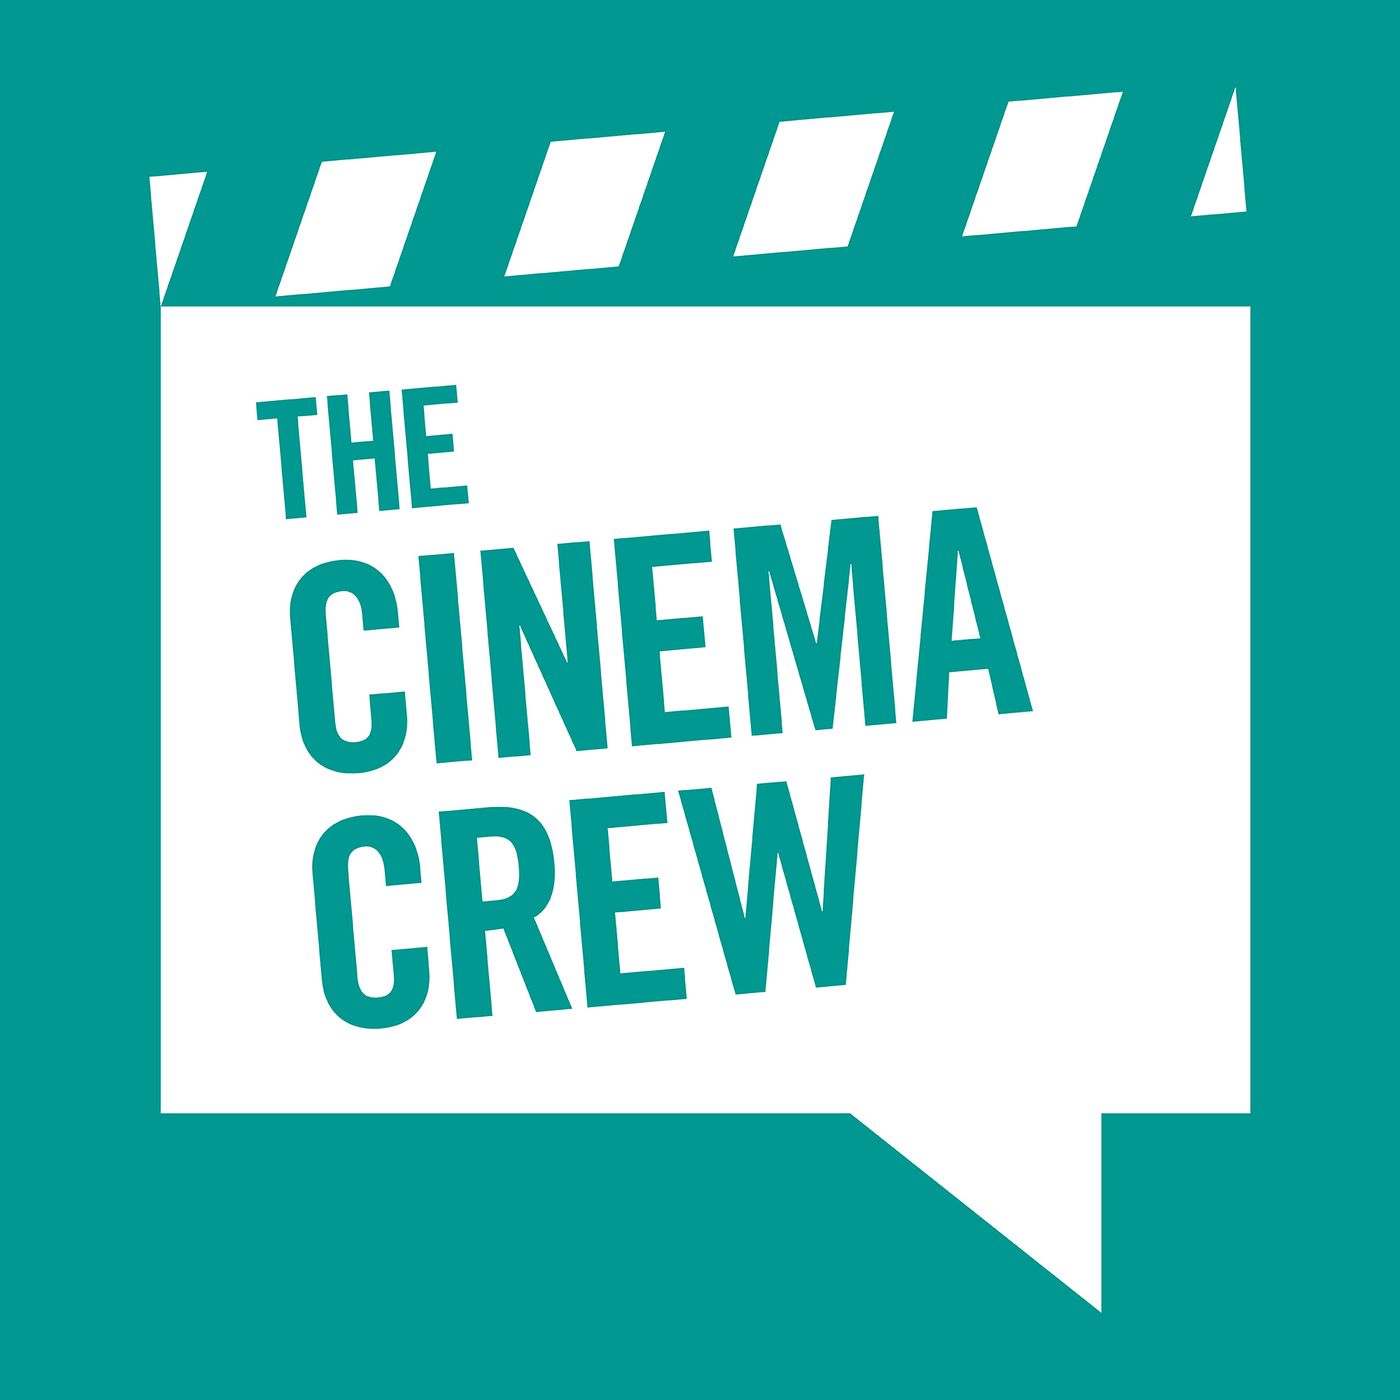 A message from The Cinema Crew